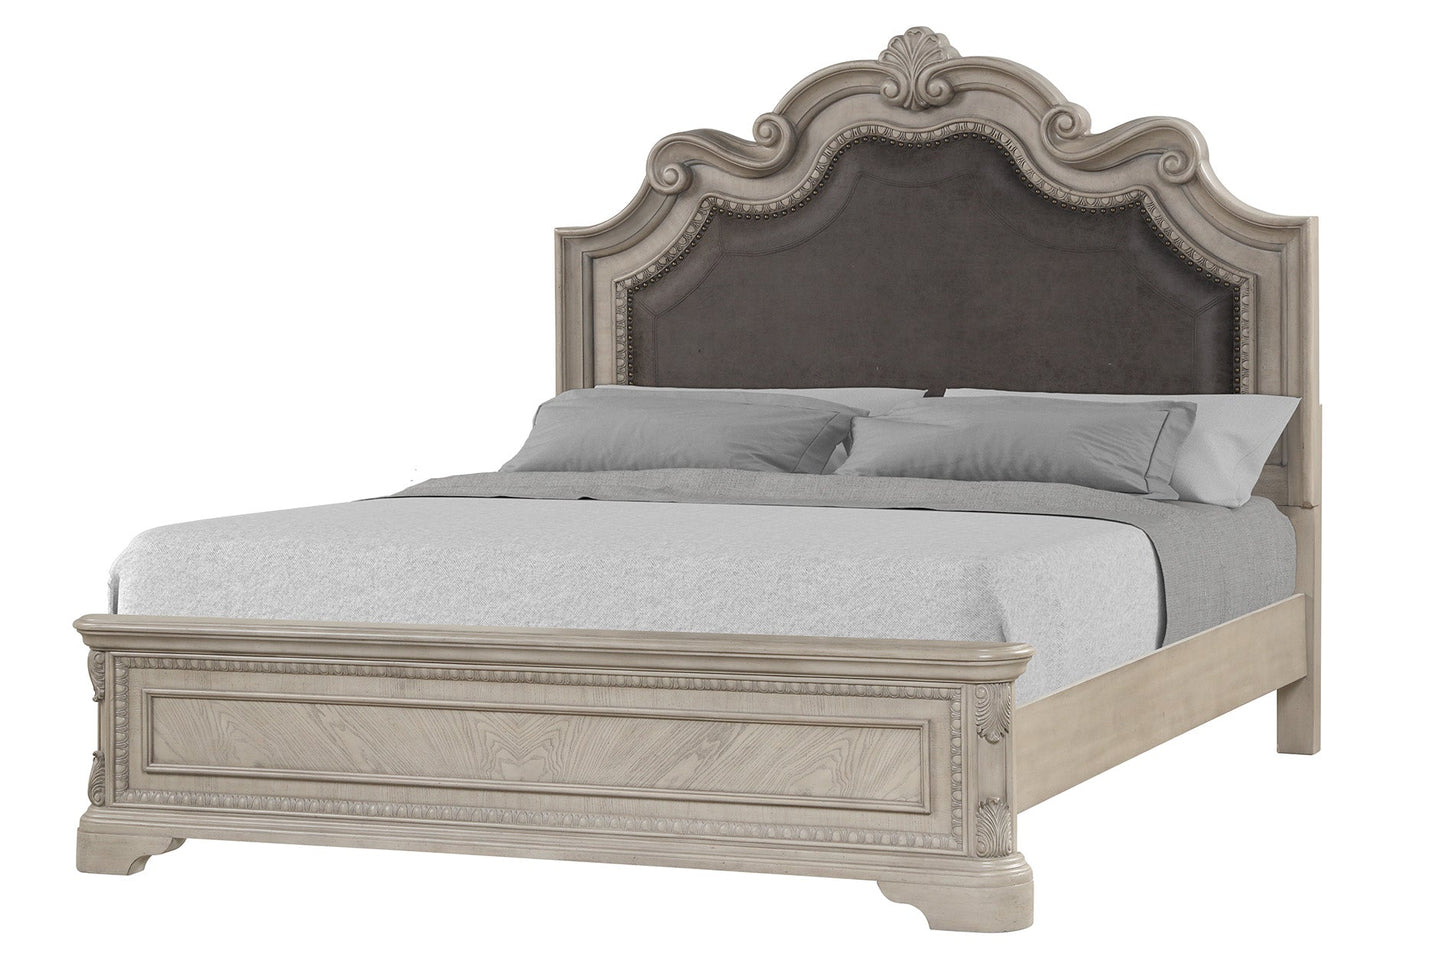 Opulence Coventry Canopy King Size Bedroom Set